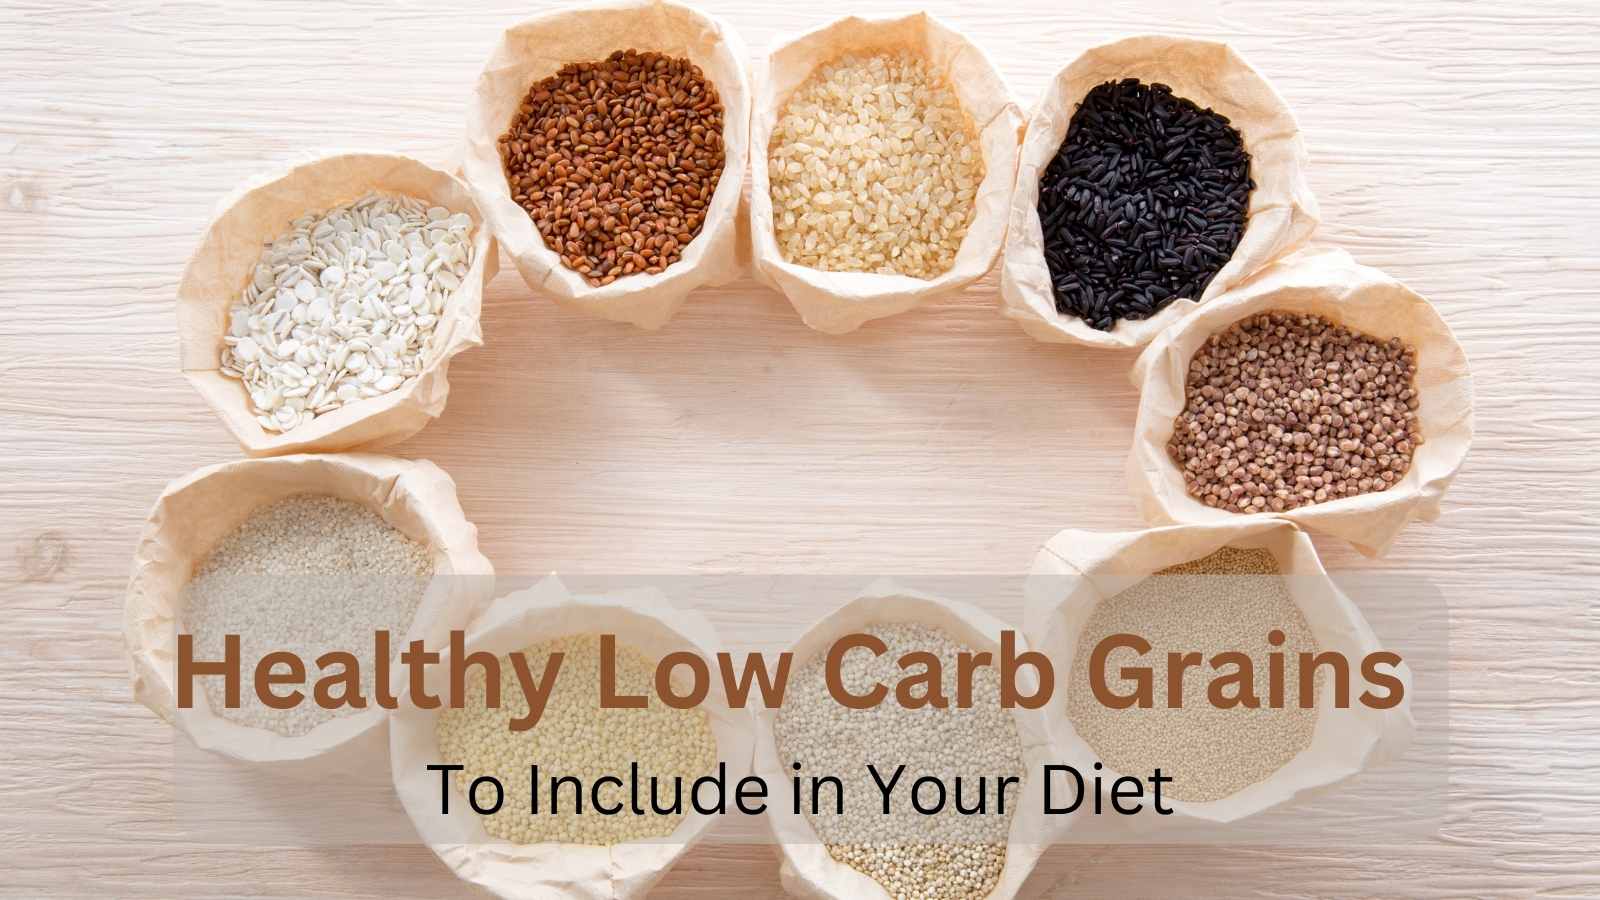 Healthy low carb grains to include in your diet